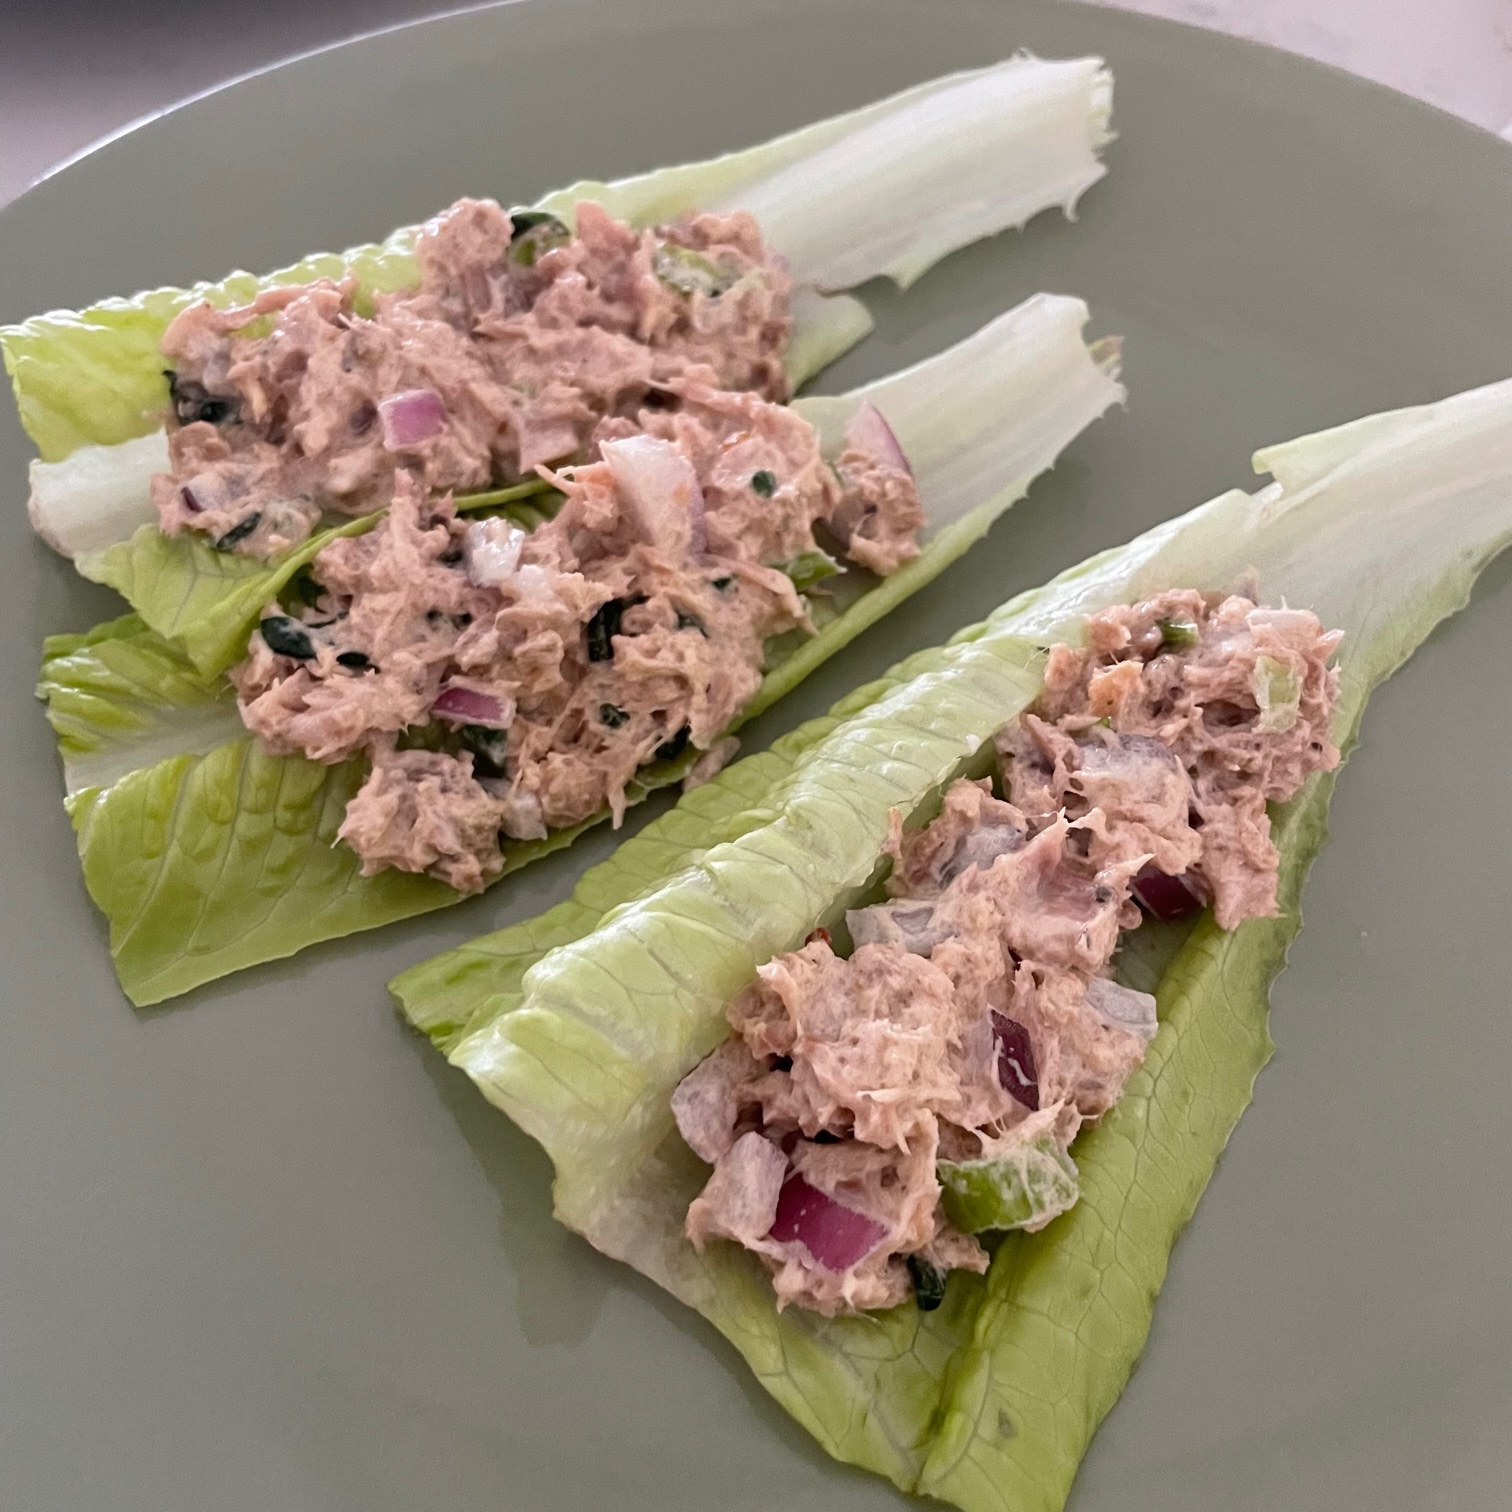 Do You Know What's in Your Tuna? Featured Product: Safe Catch Tuna -  Better, Safer Tuna and Healthy Recipes!